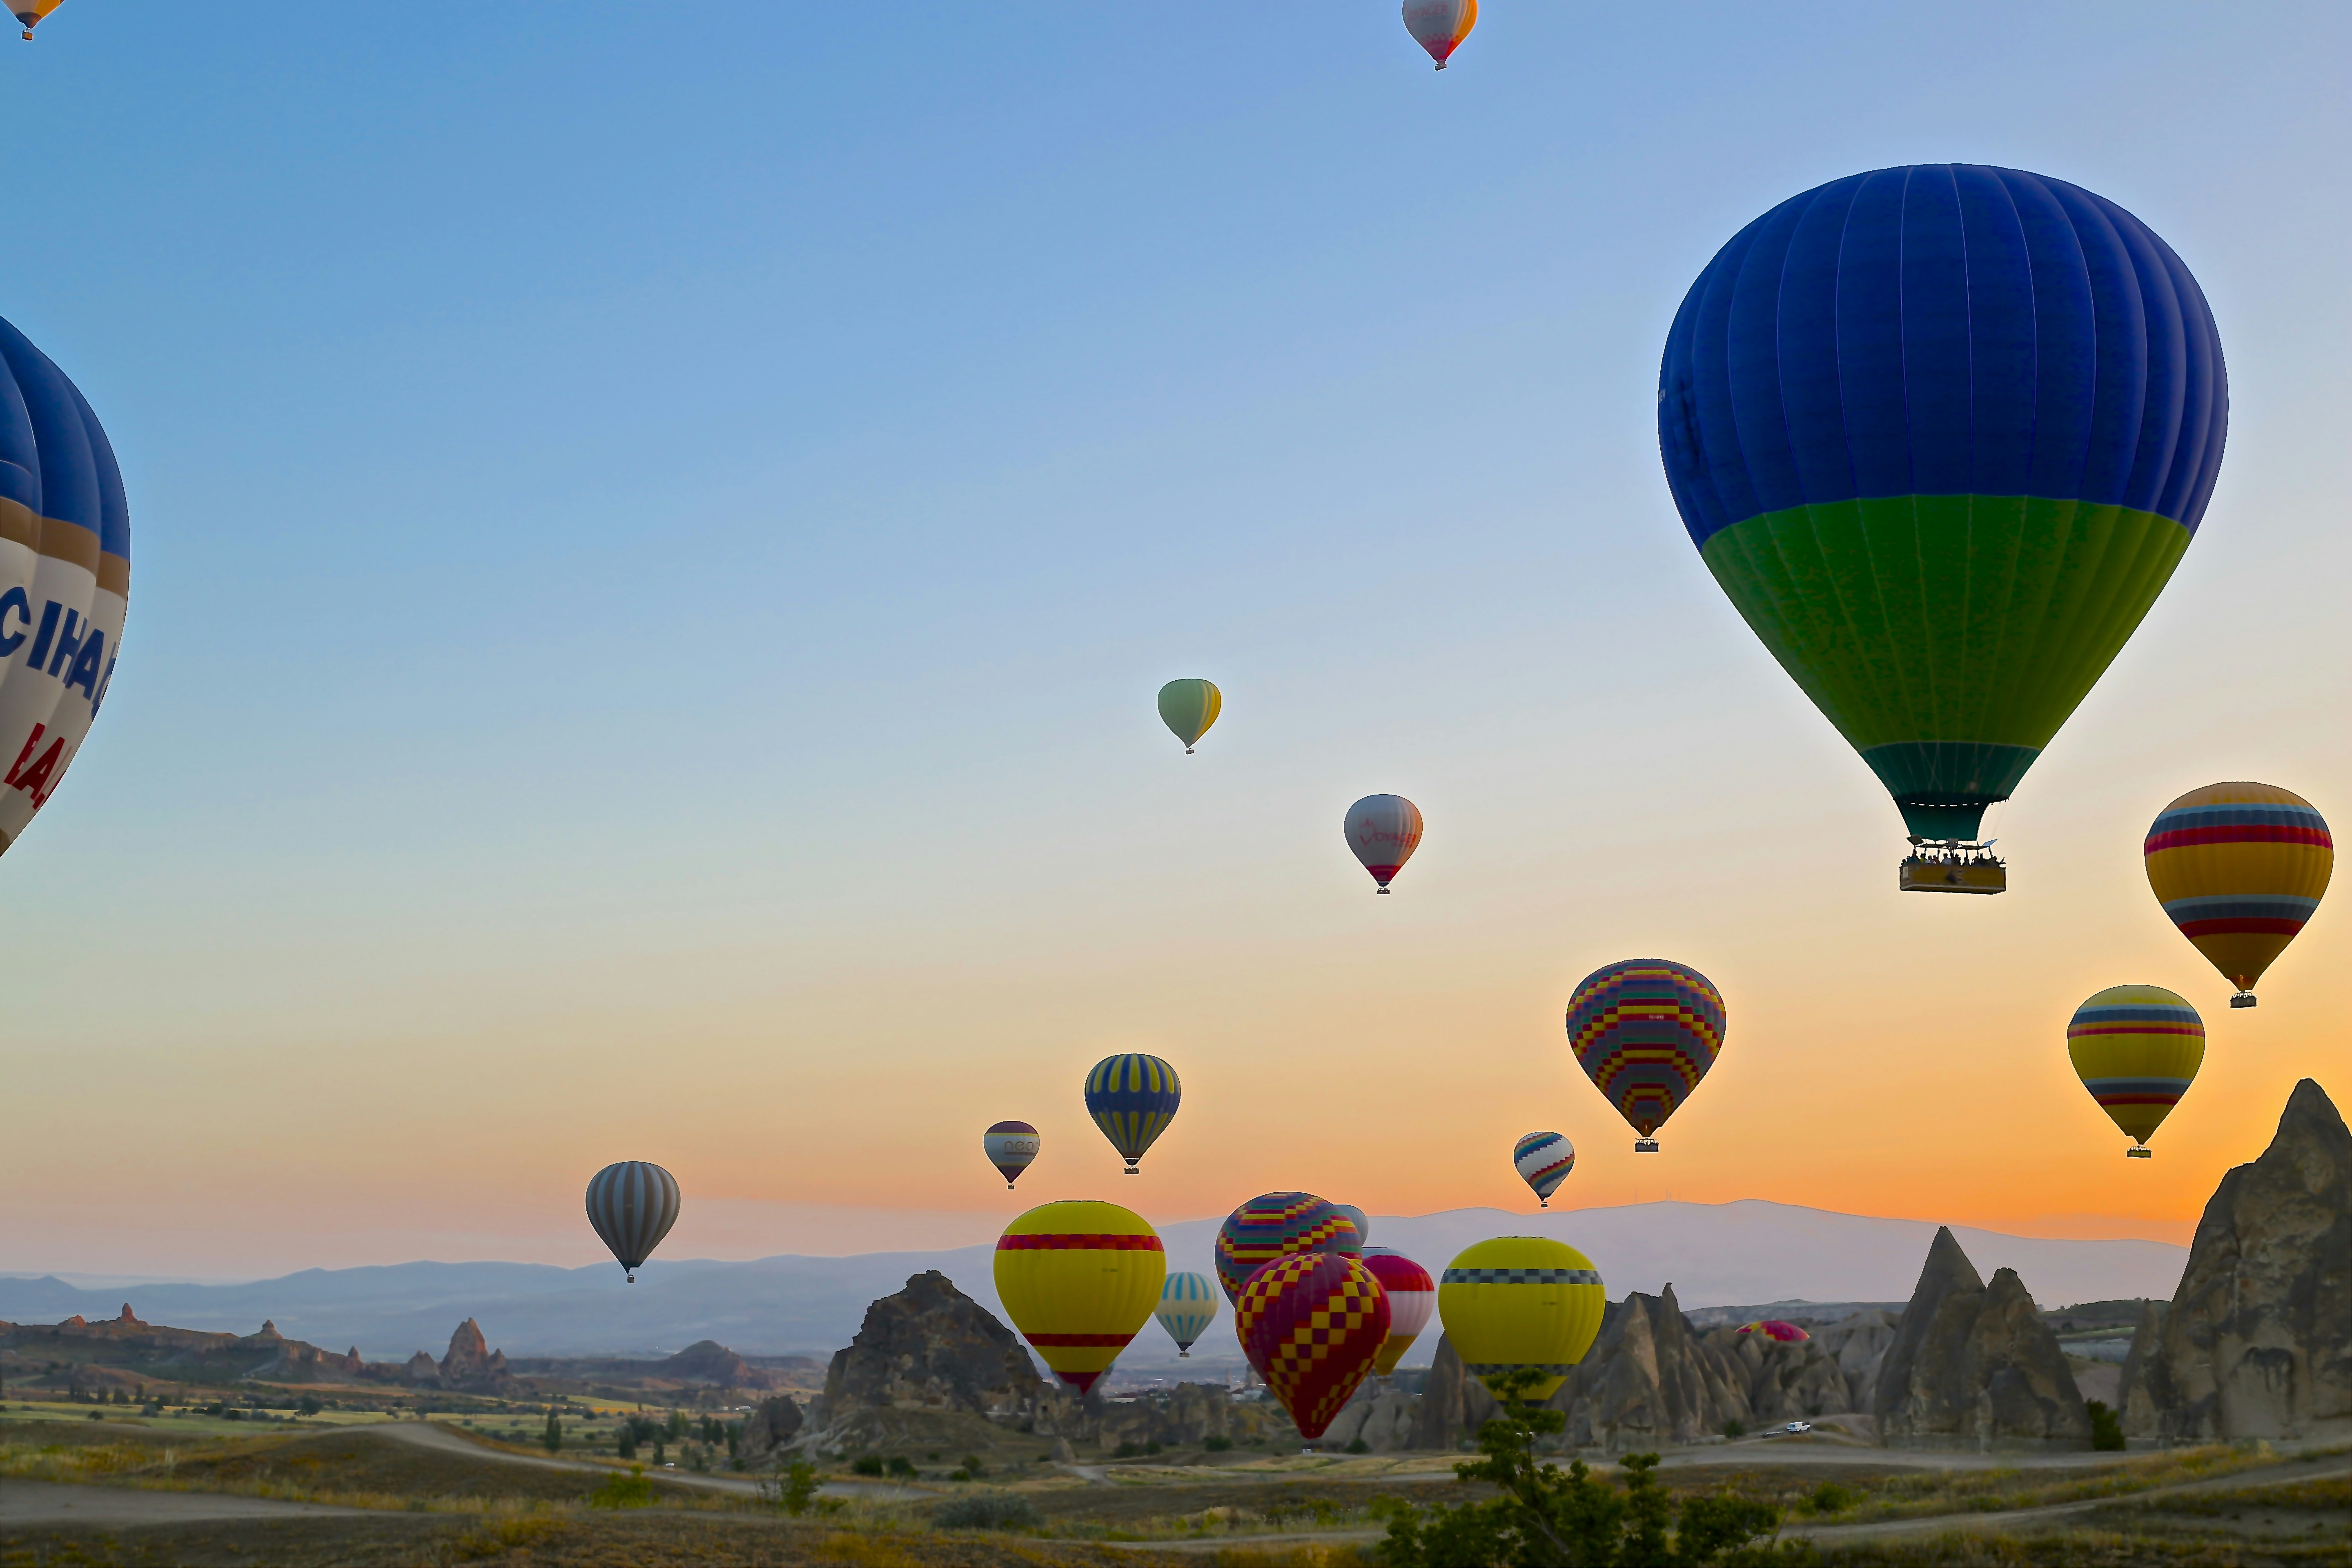 assorted-color hot air balloons in clear blue sky